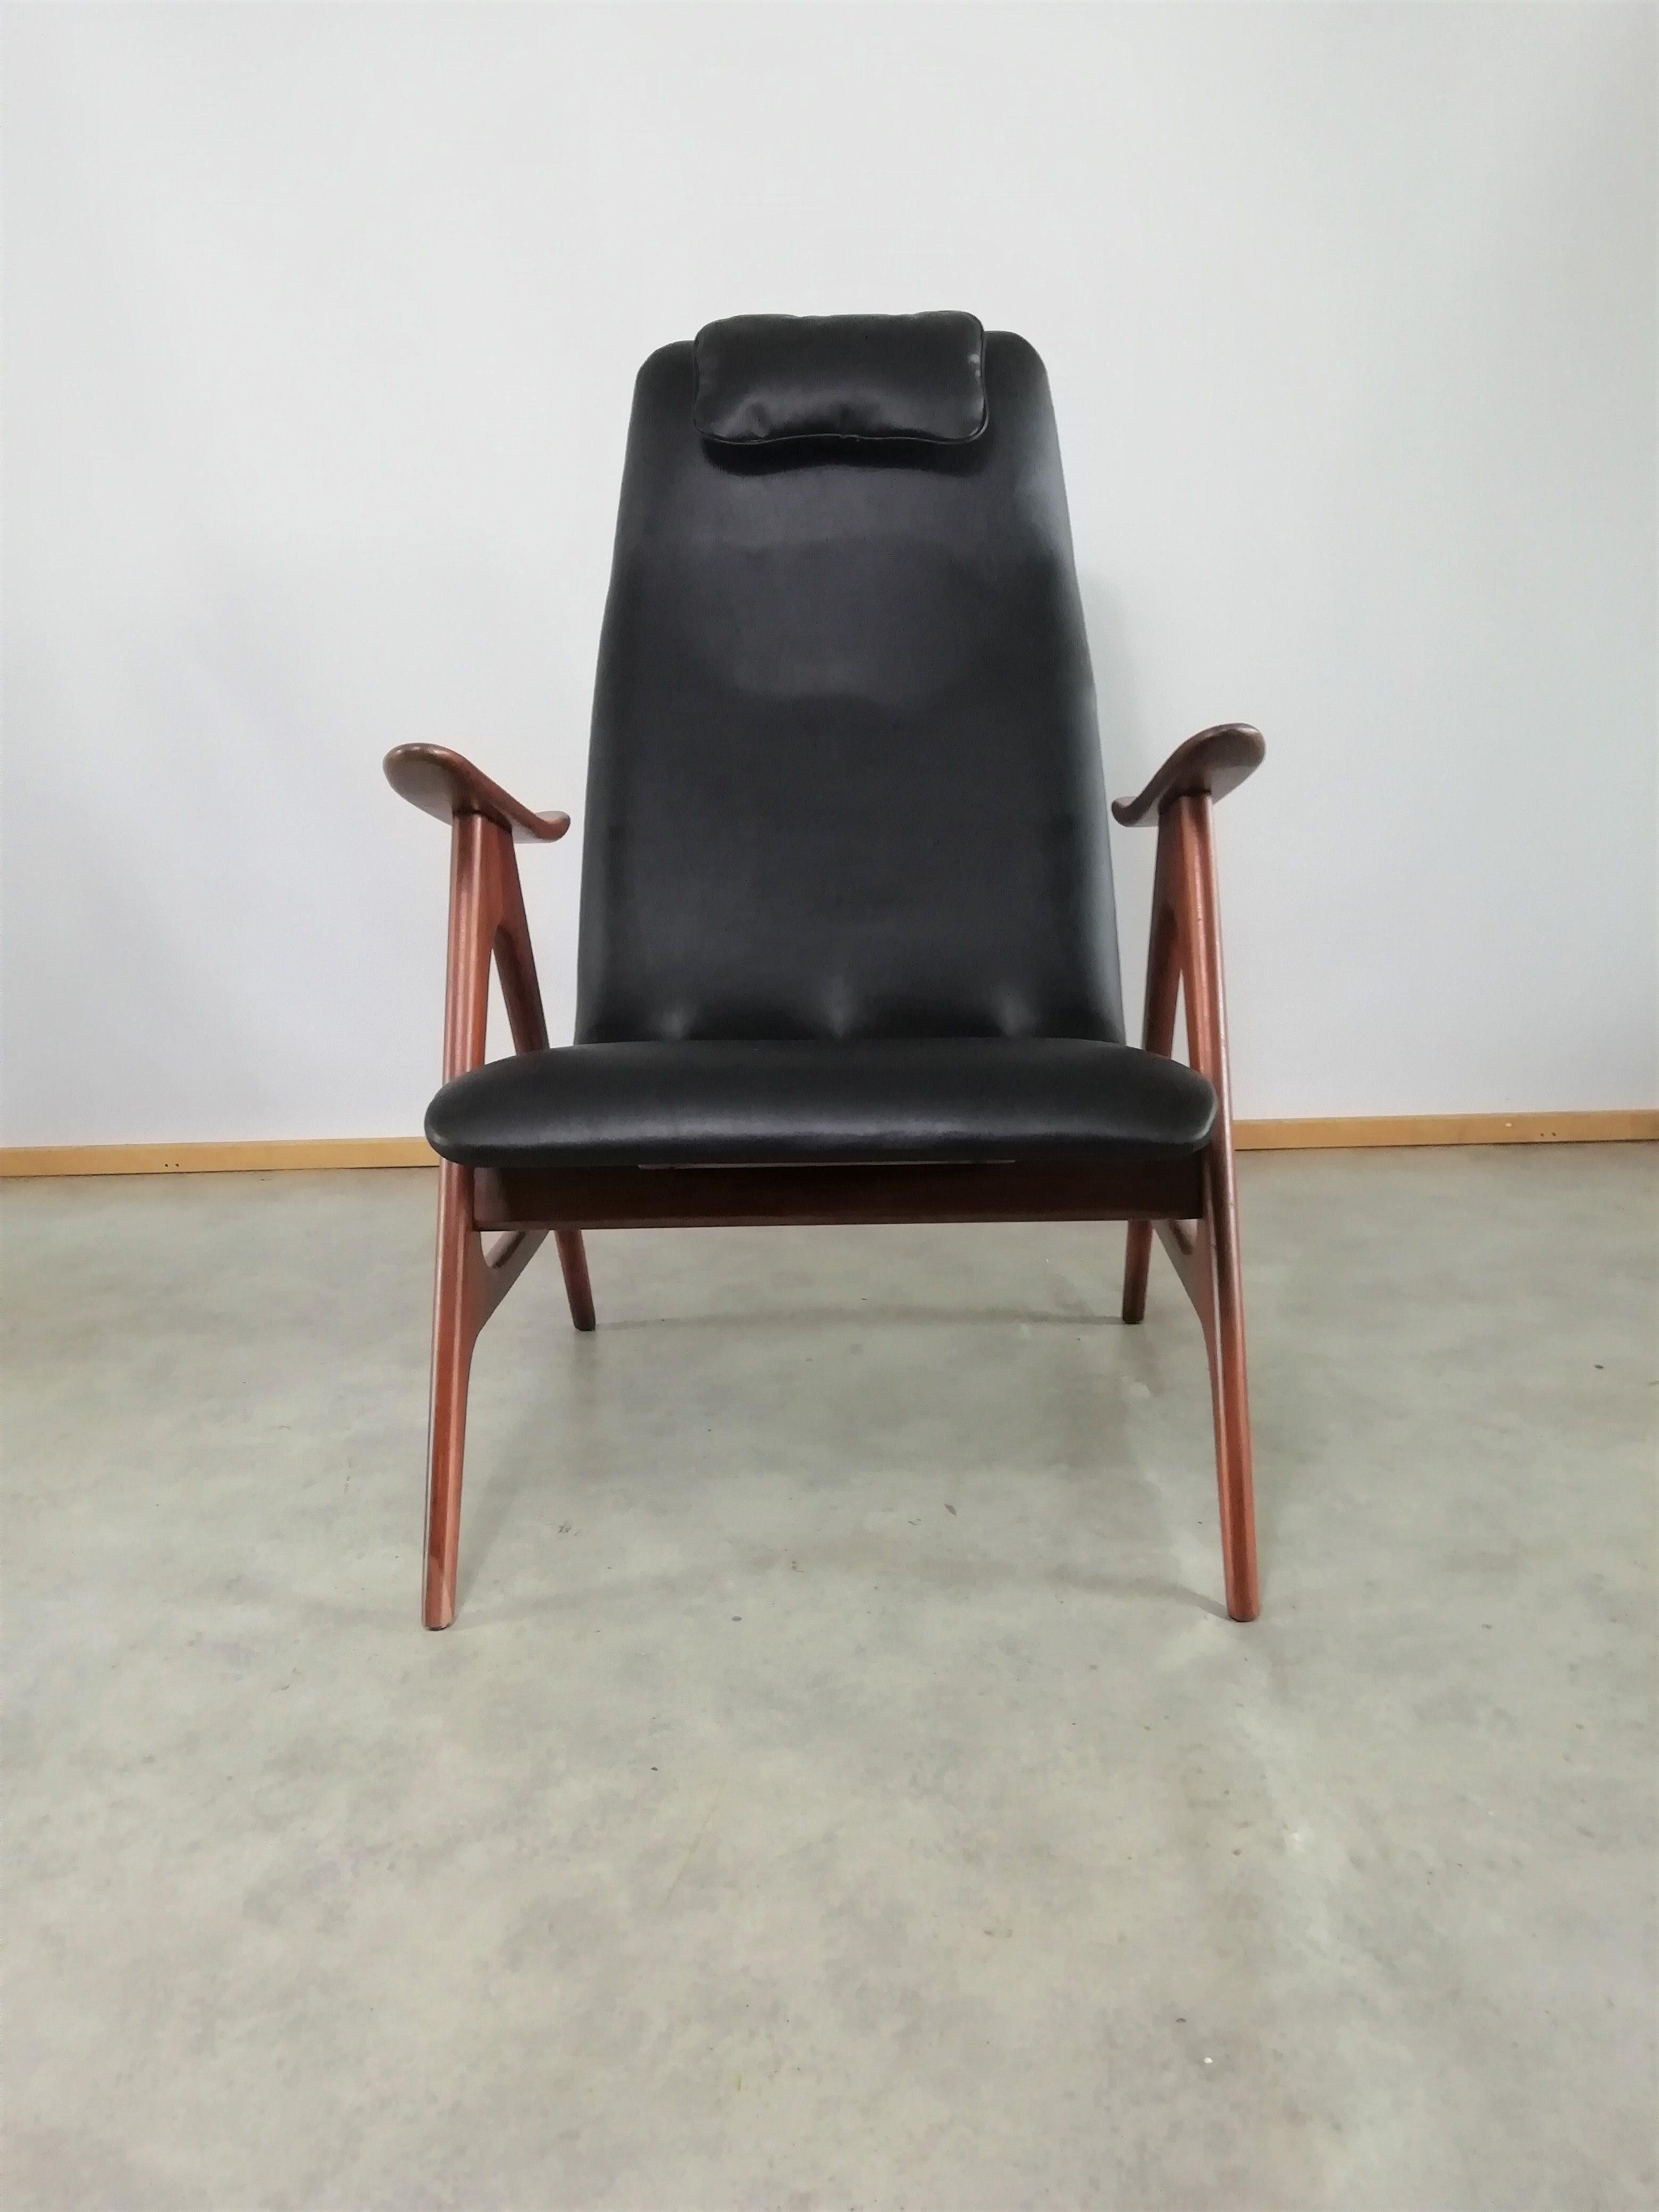 Very special, unique armchair designed by Louis Van Teeffelen, one of the most loved Dutch designers. It’s fantastic teak frame and high back make together very elegant line. Frame is restored. Armchair is reupholstered with high quality Italian